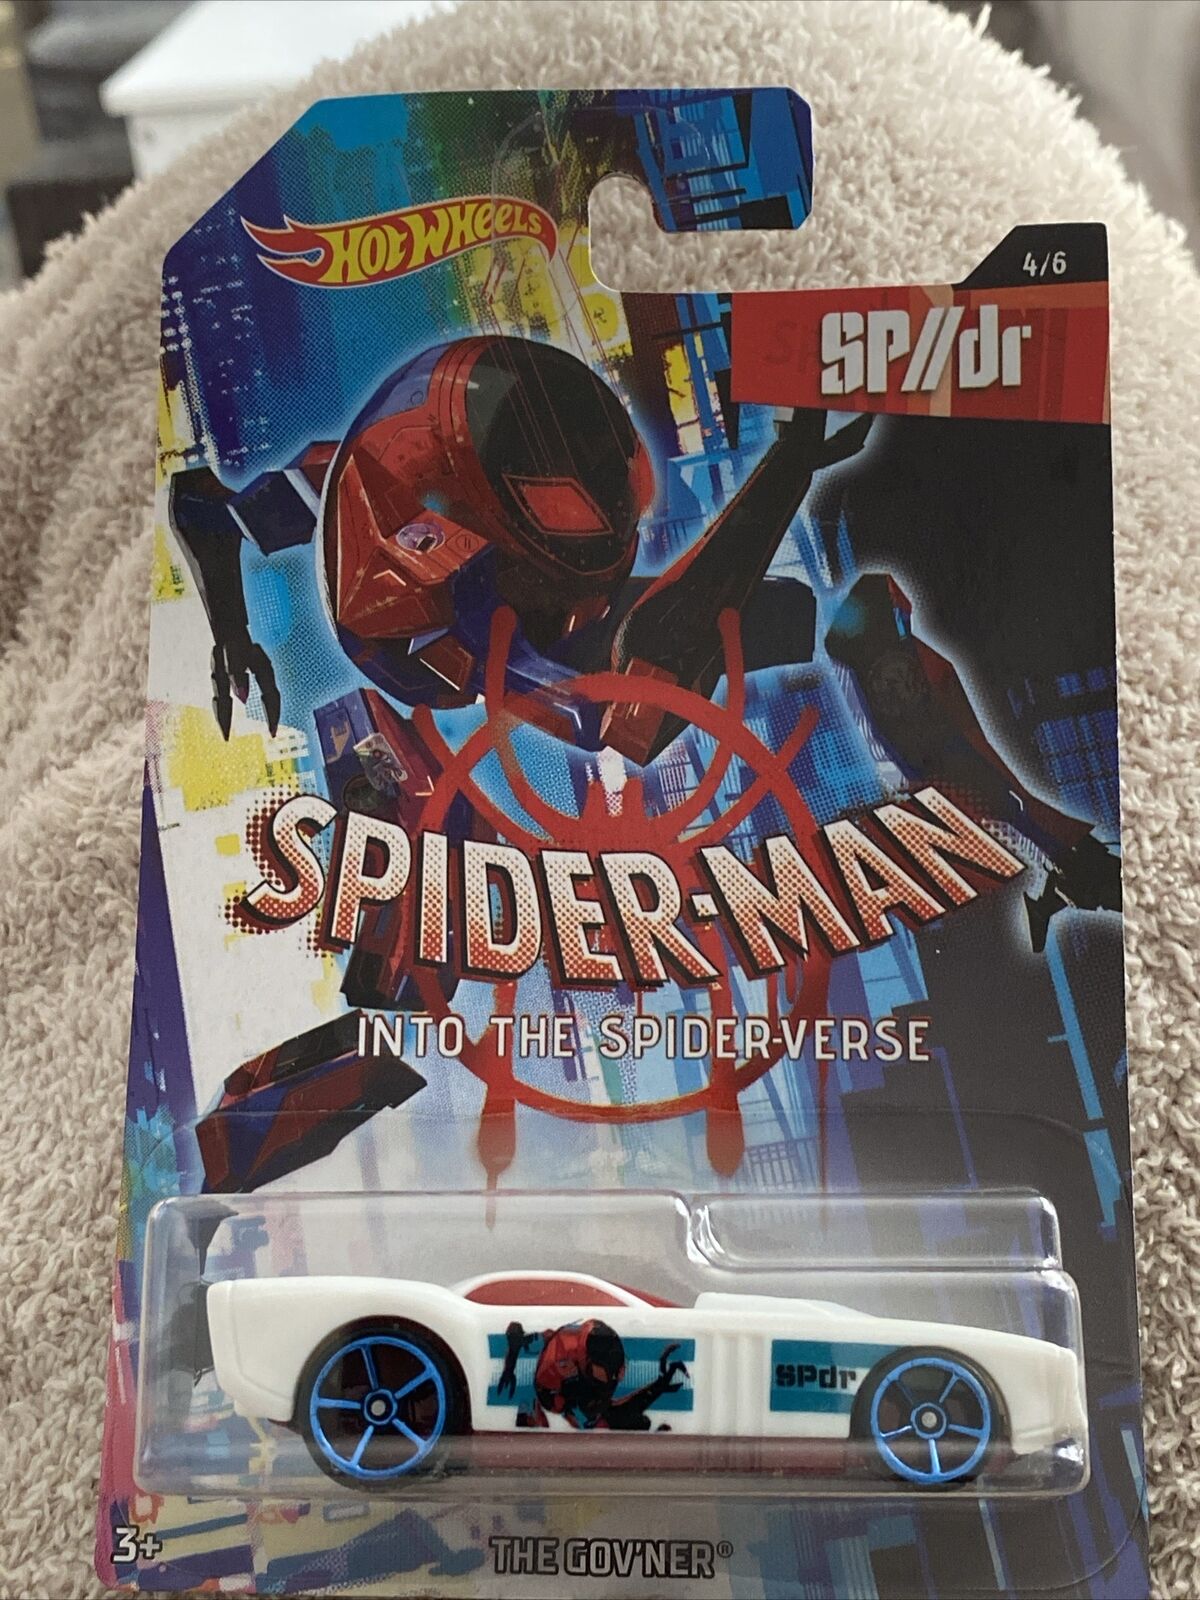 2019 HOT WHEELS SPIDER-MAN “INTO THE SPIDERVERSE” 4/6 THE GOV'NER WHITE